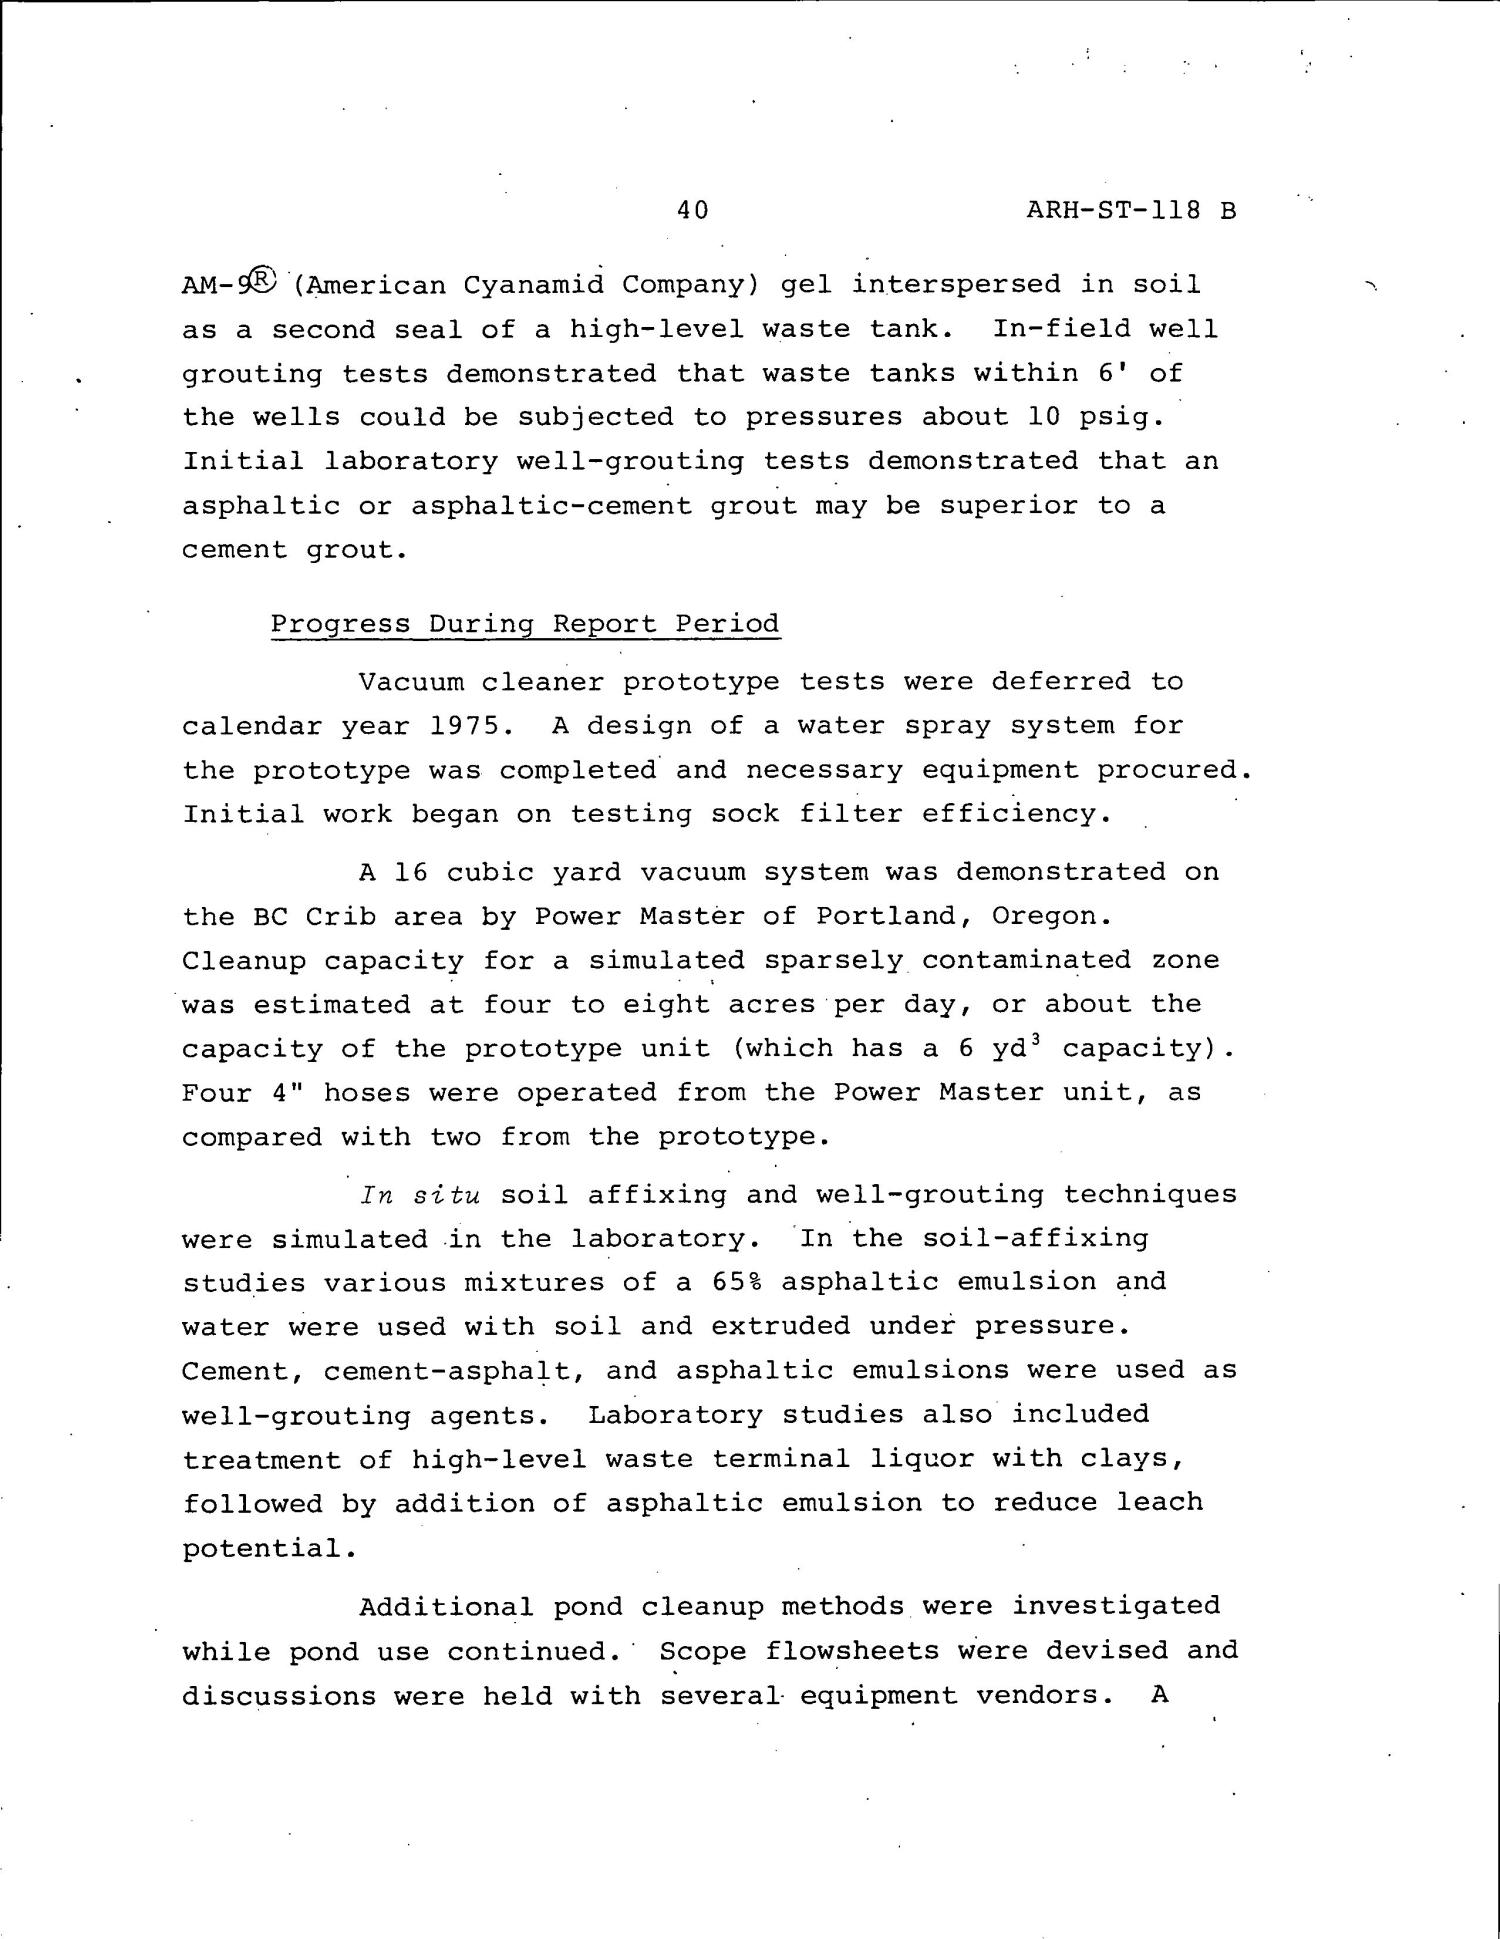 Atlantic Richfield Hanford Company semiannual report, BB process development, May 1, 1974 through October 31, 1974
                                                
                                                    [Sequence #]: 45 of 74
                                                